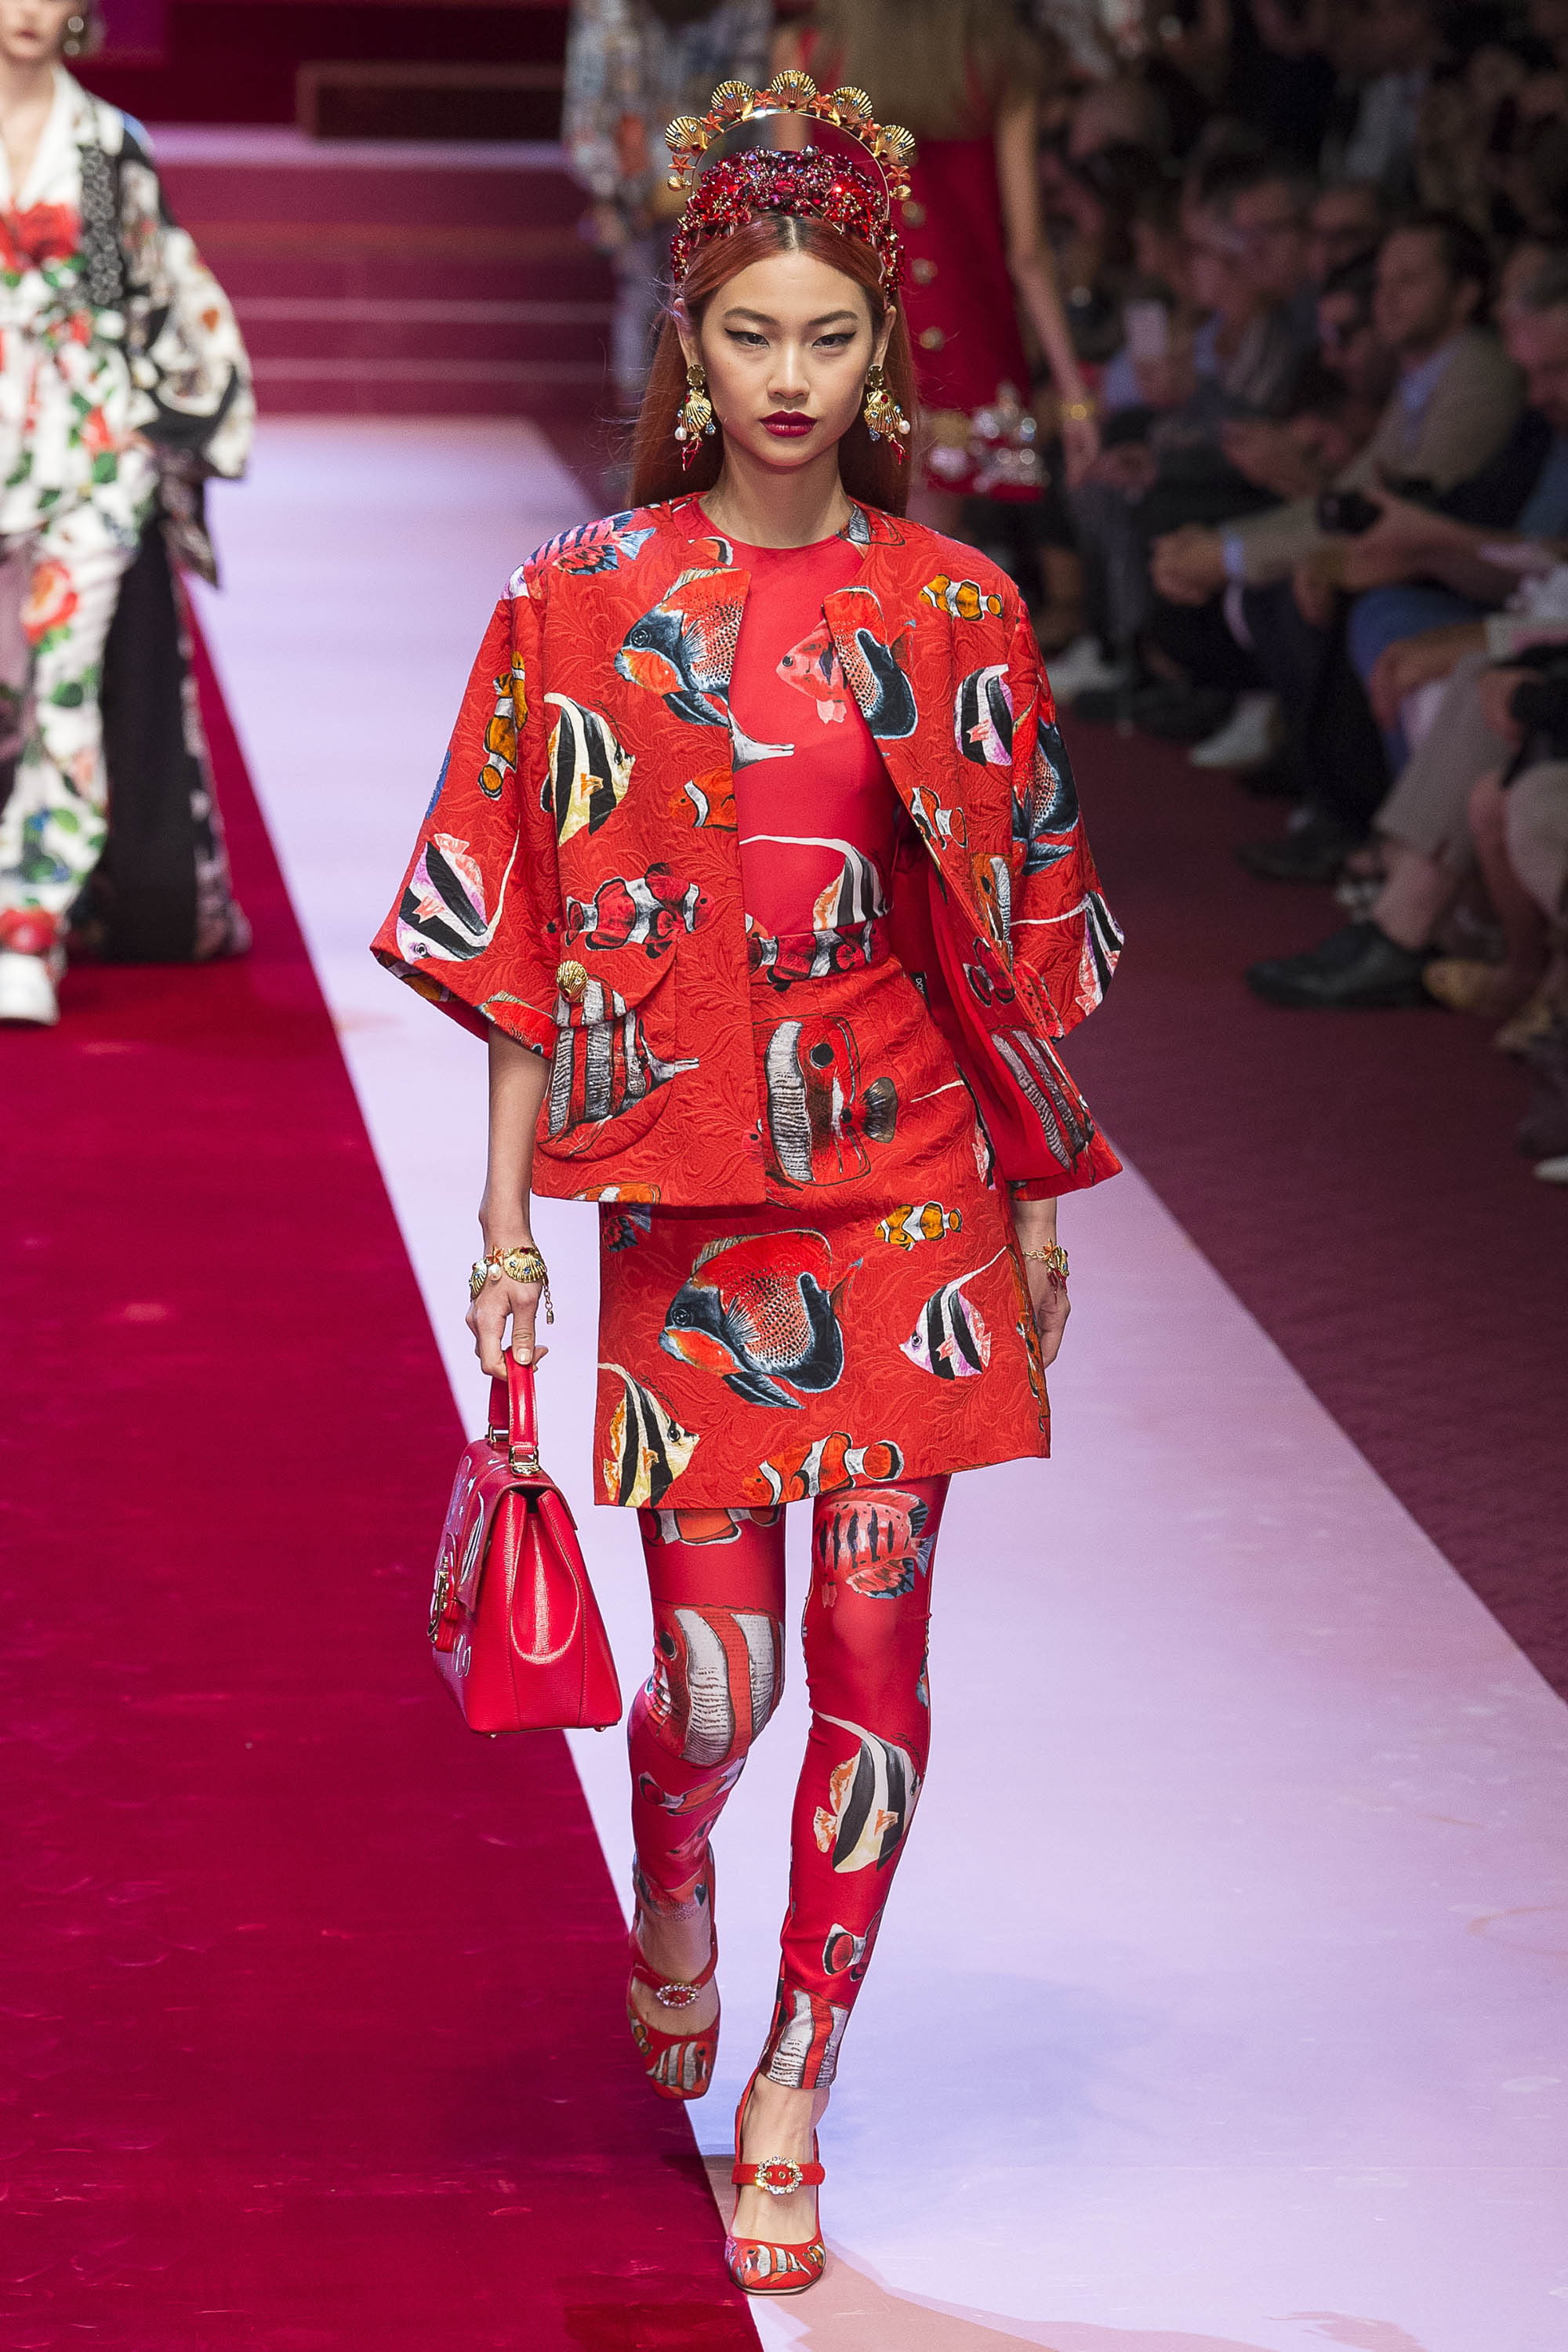 Model Hoyeon Jung walks on the runway during the Dolce & Gabbana